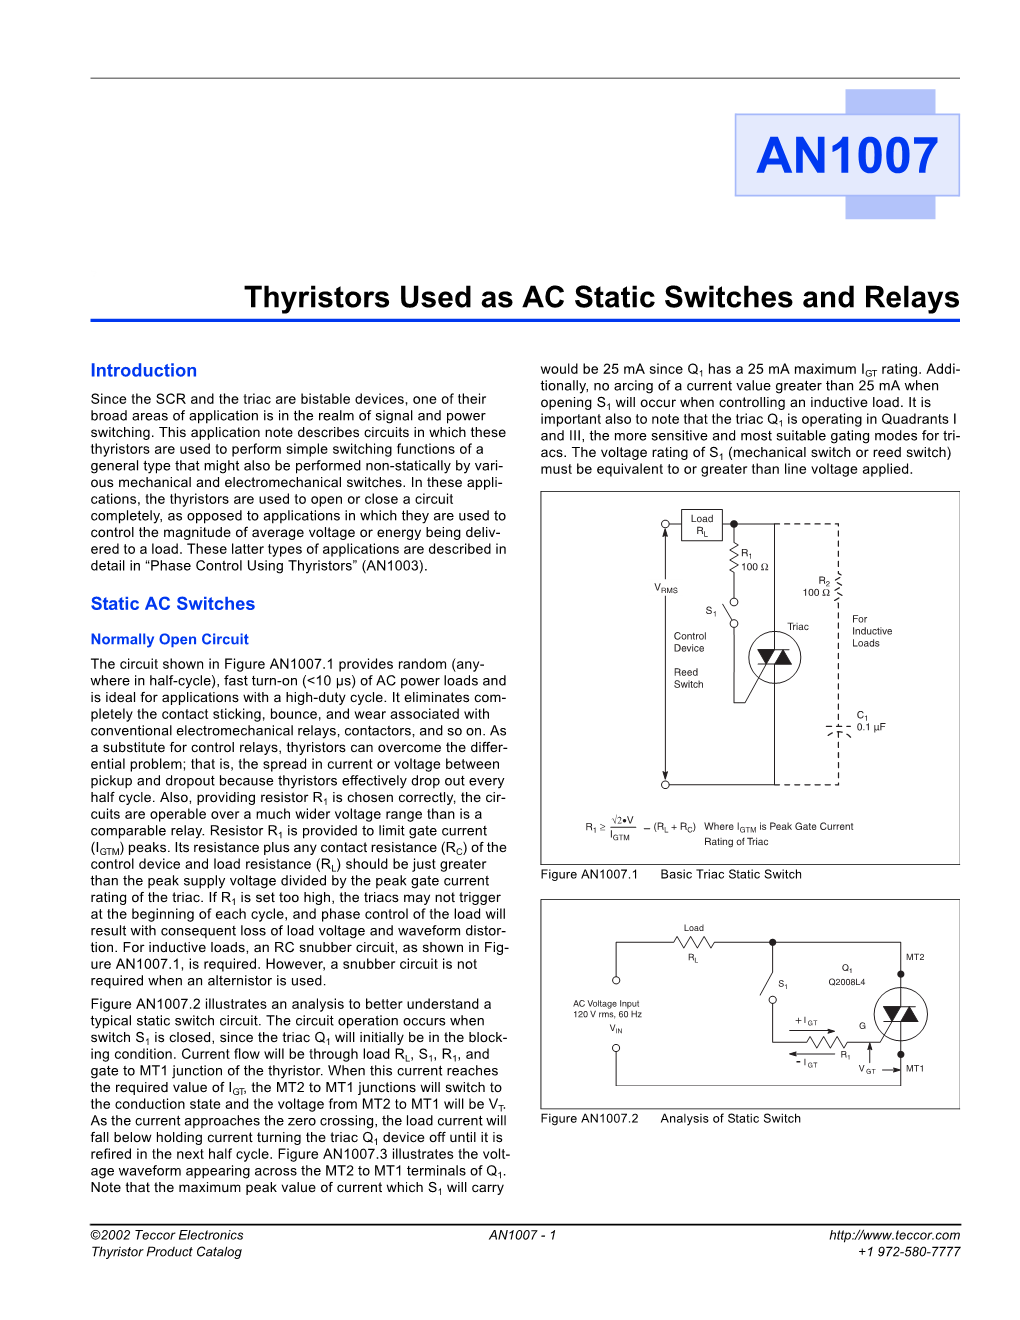 Thyristors Used As AC Static Switches and Relays